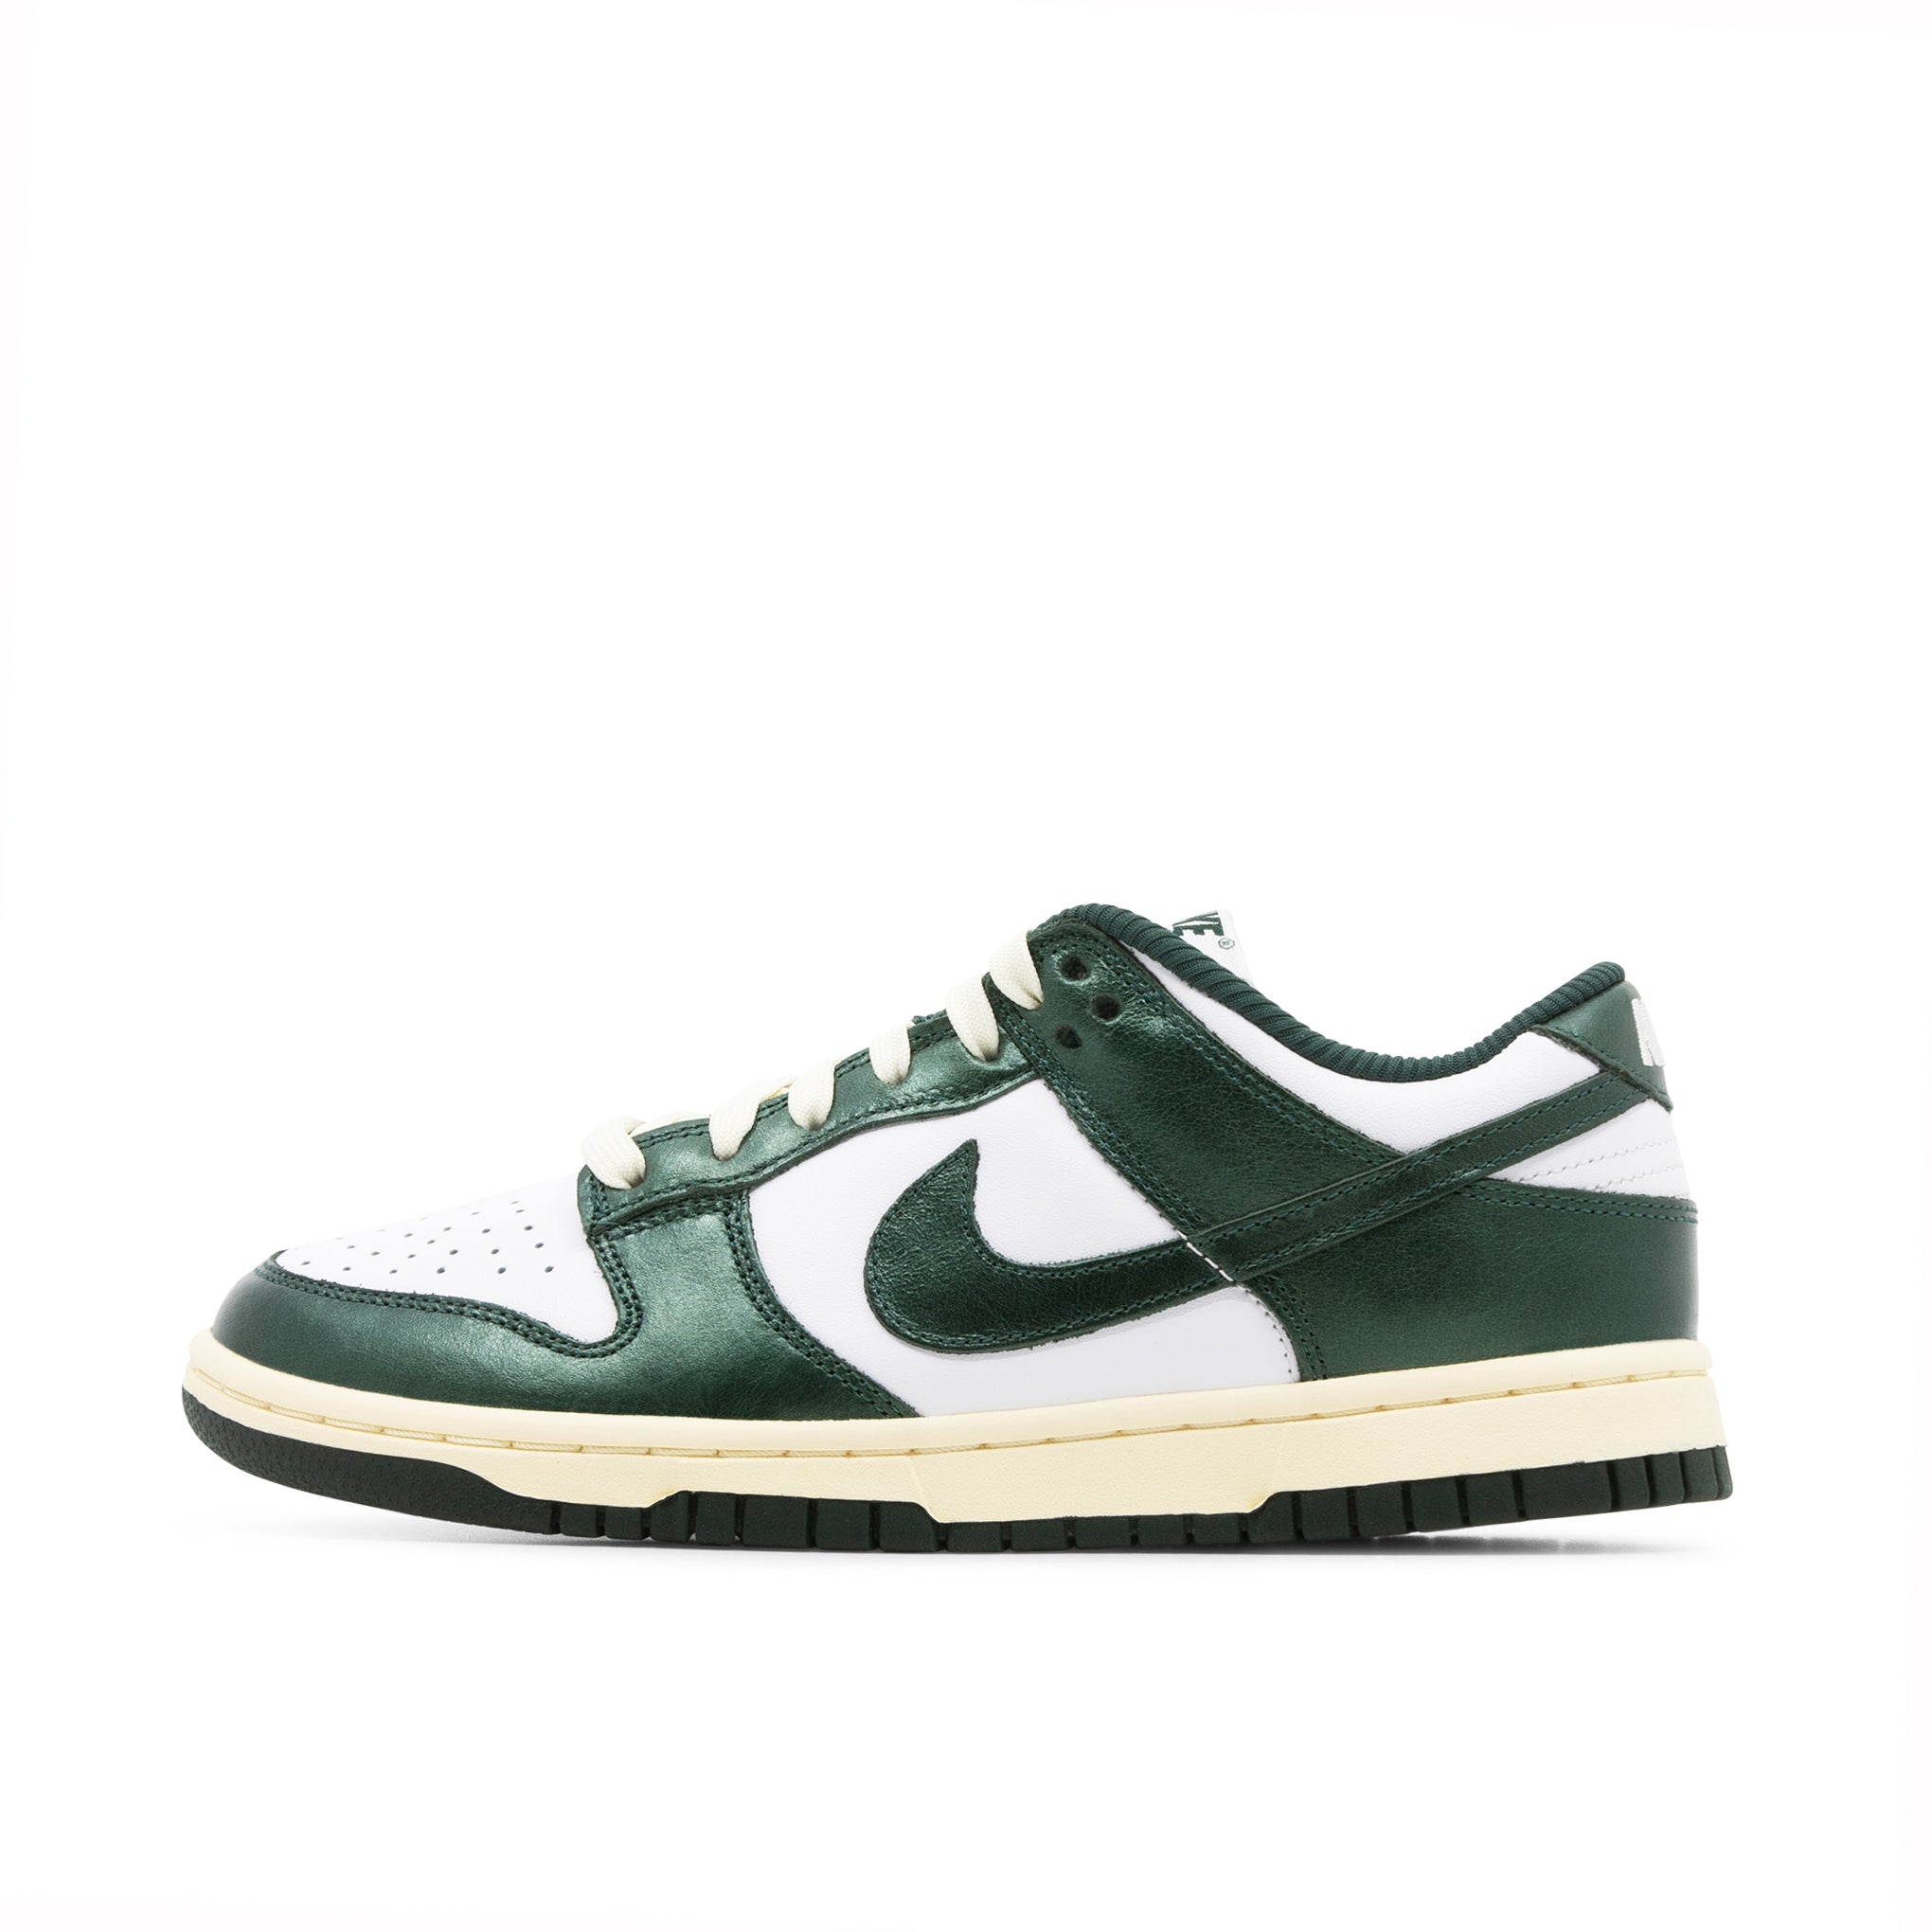 NIKE DUNK LOW WMNS 复古绿